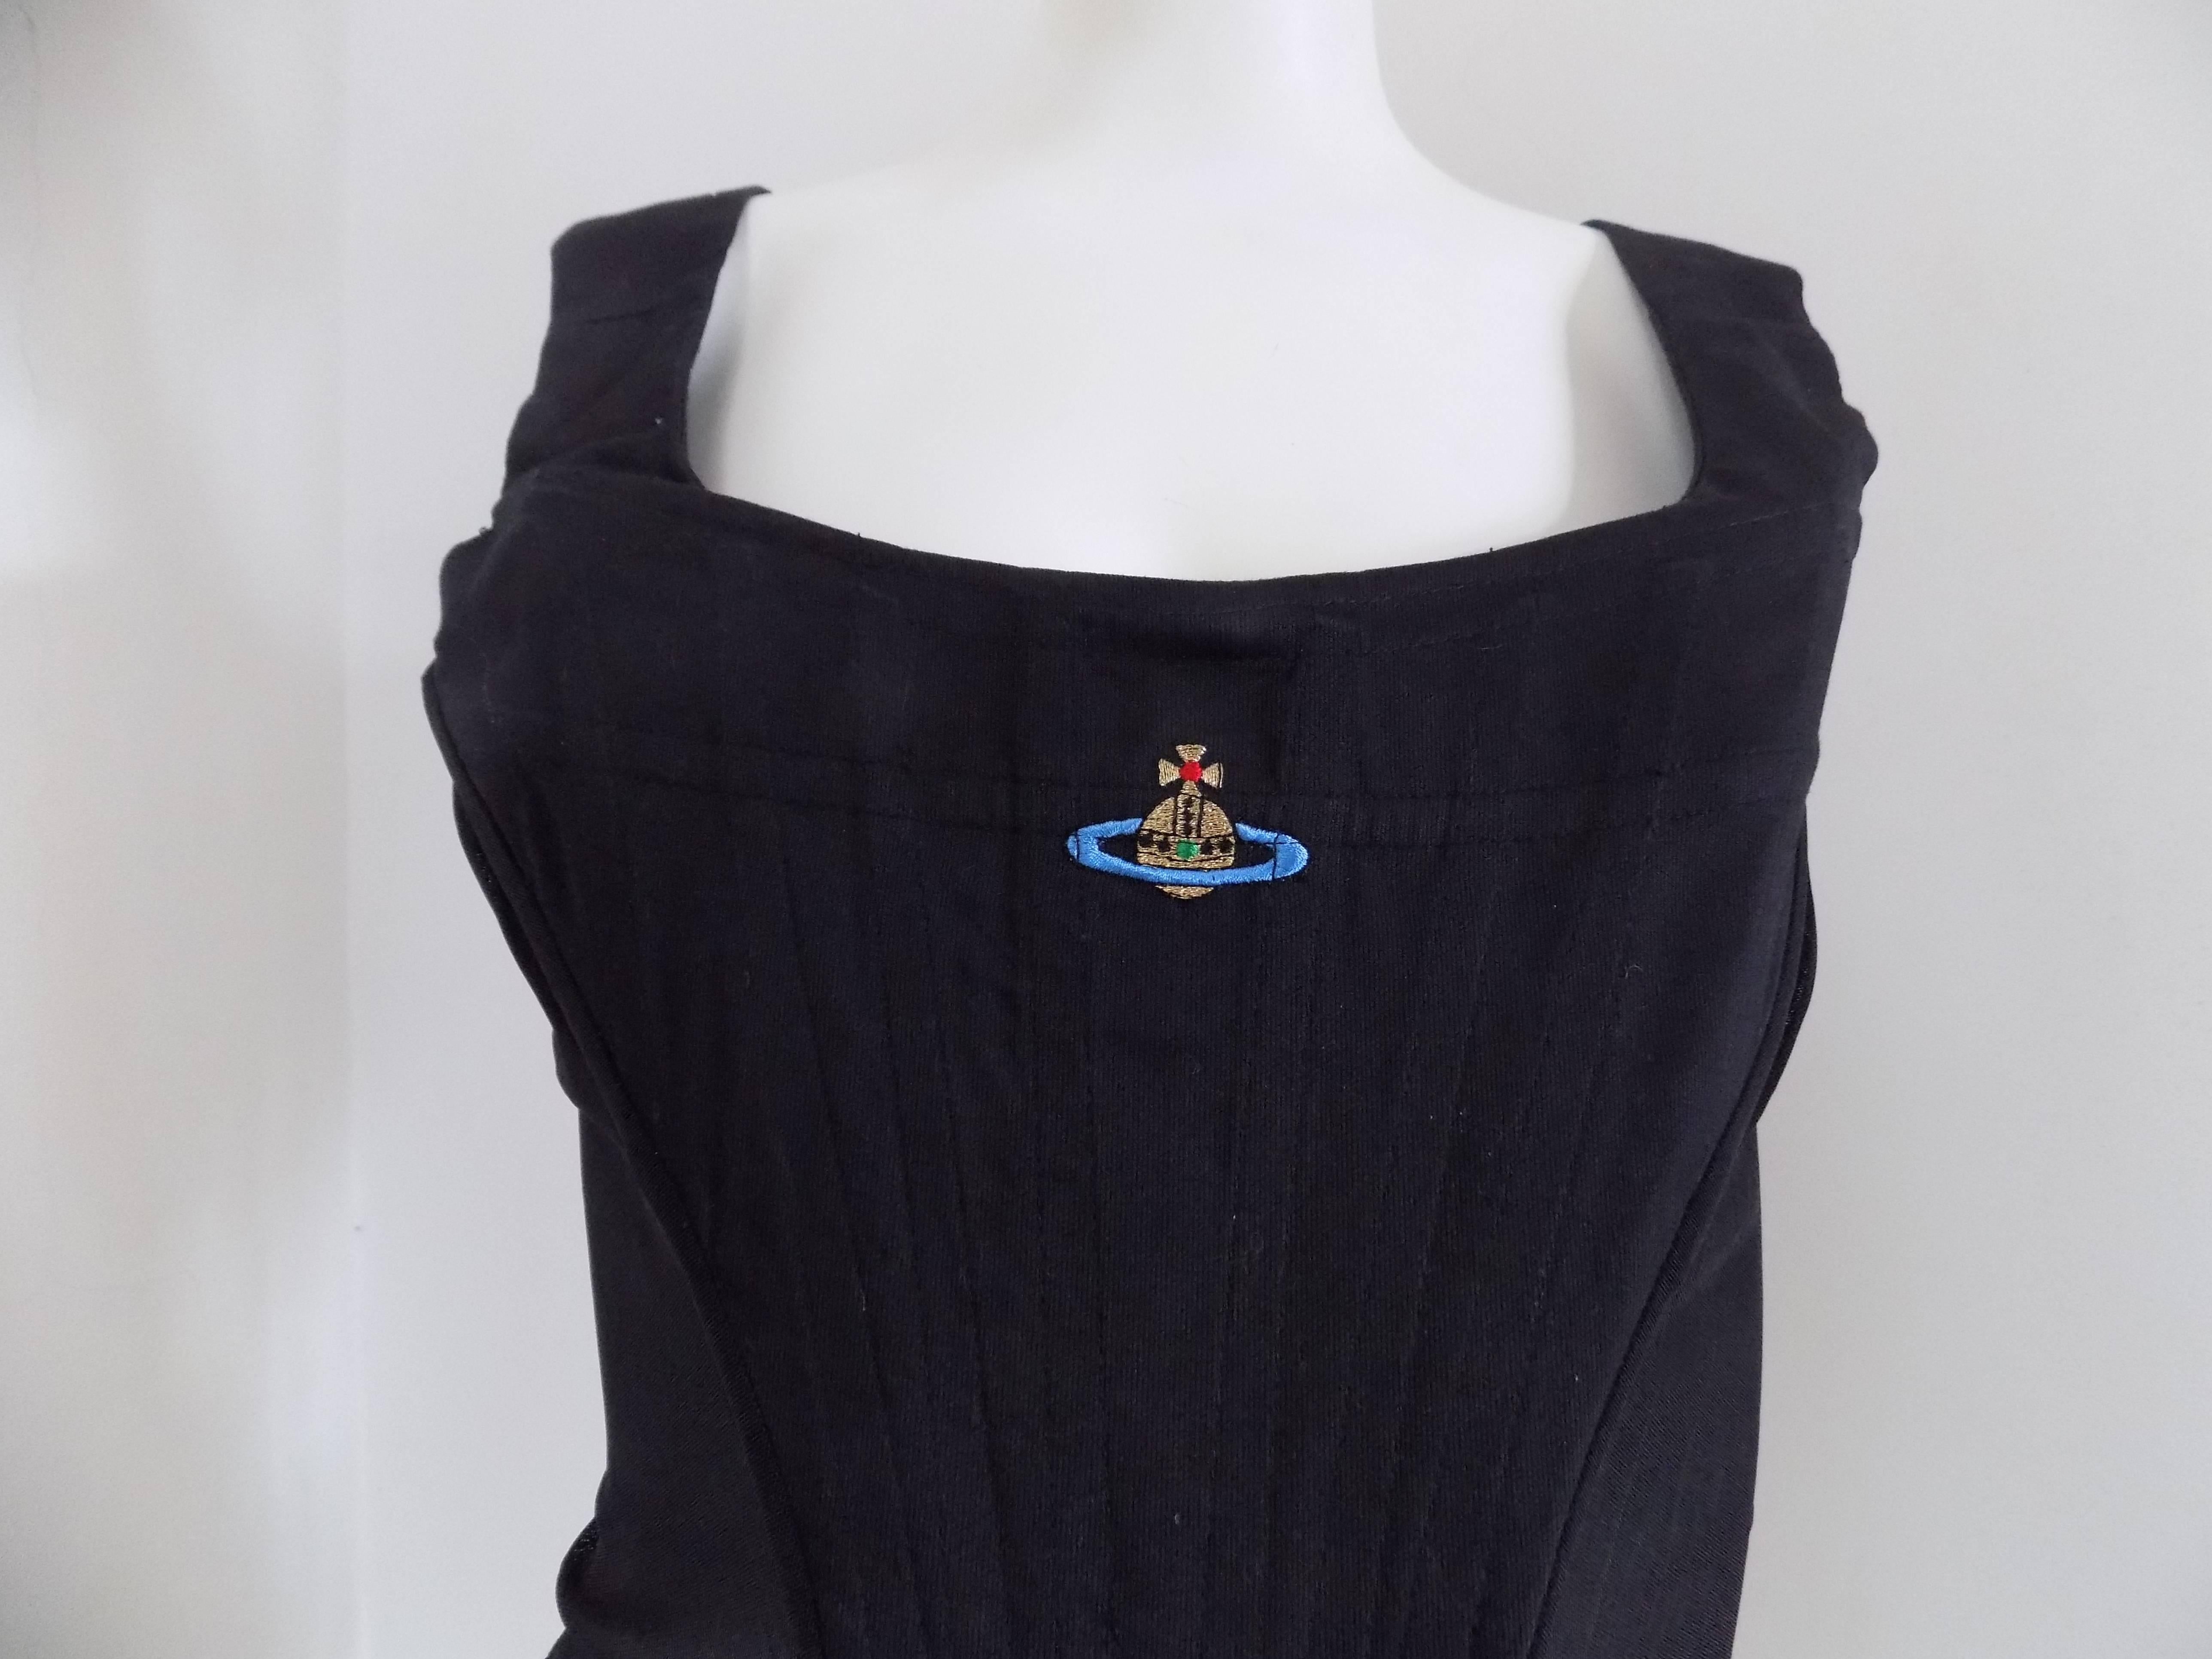 Vivienne Westwood Red Label black corset in size 44